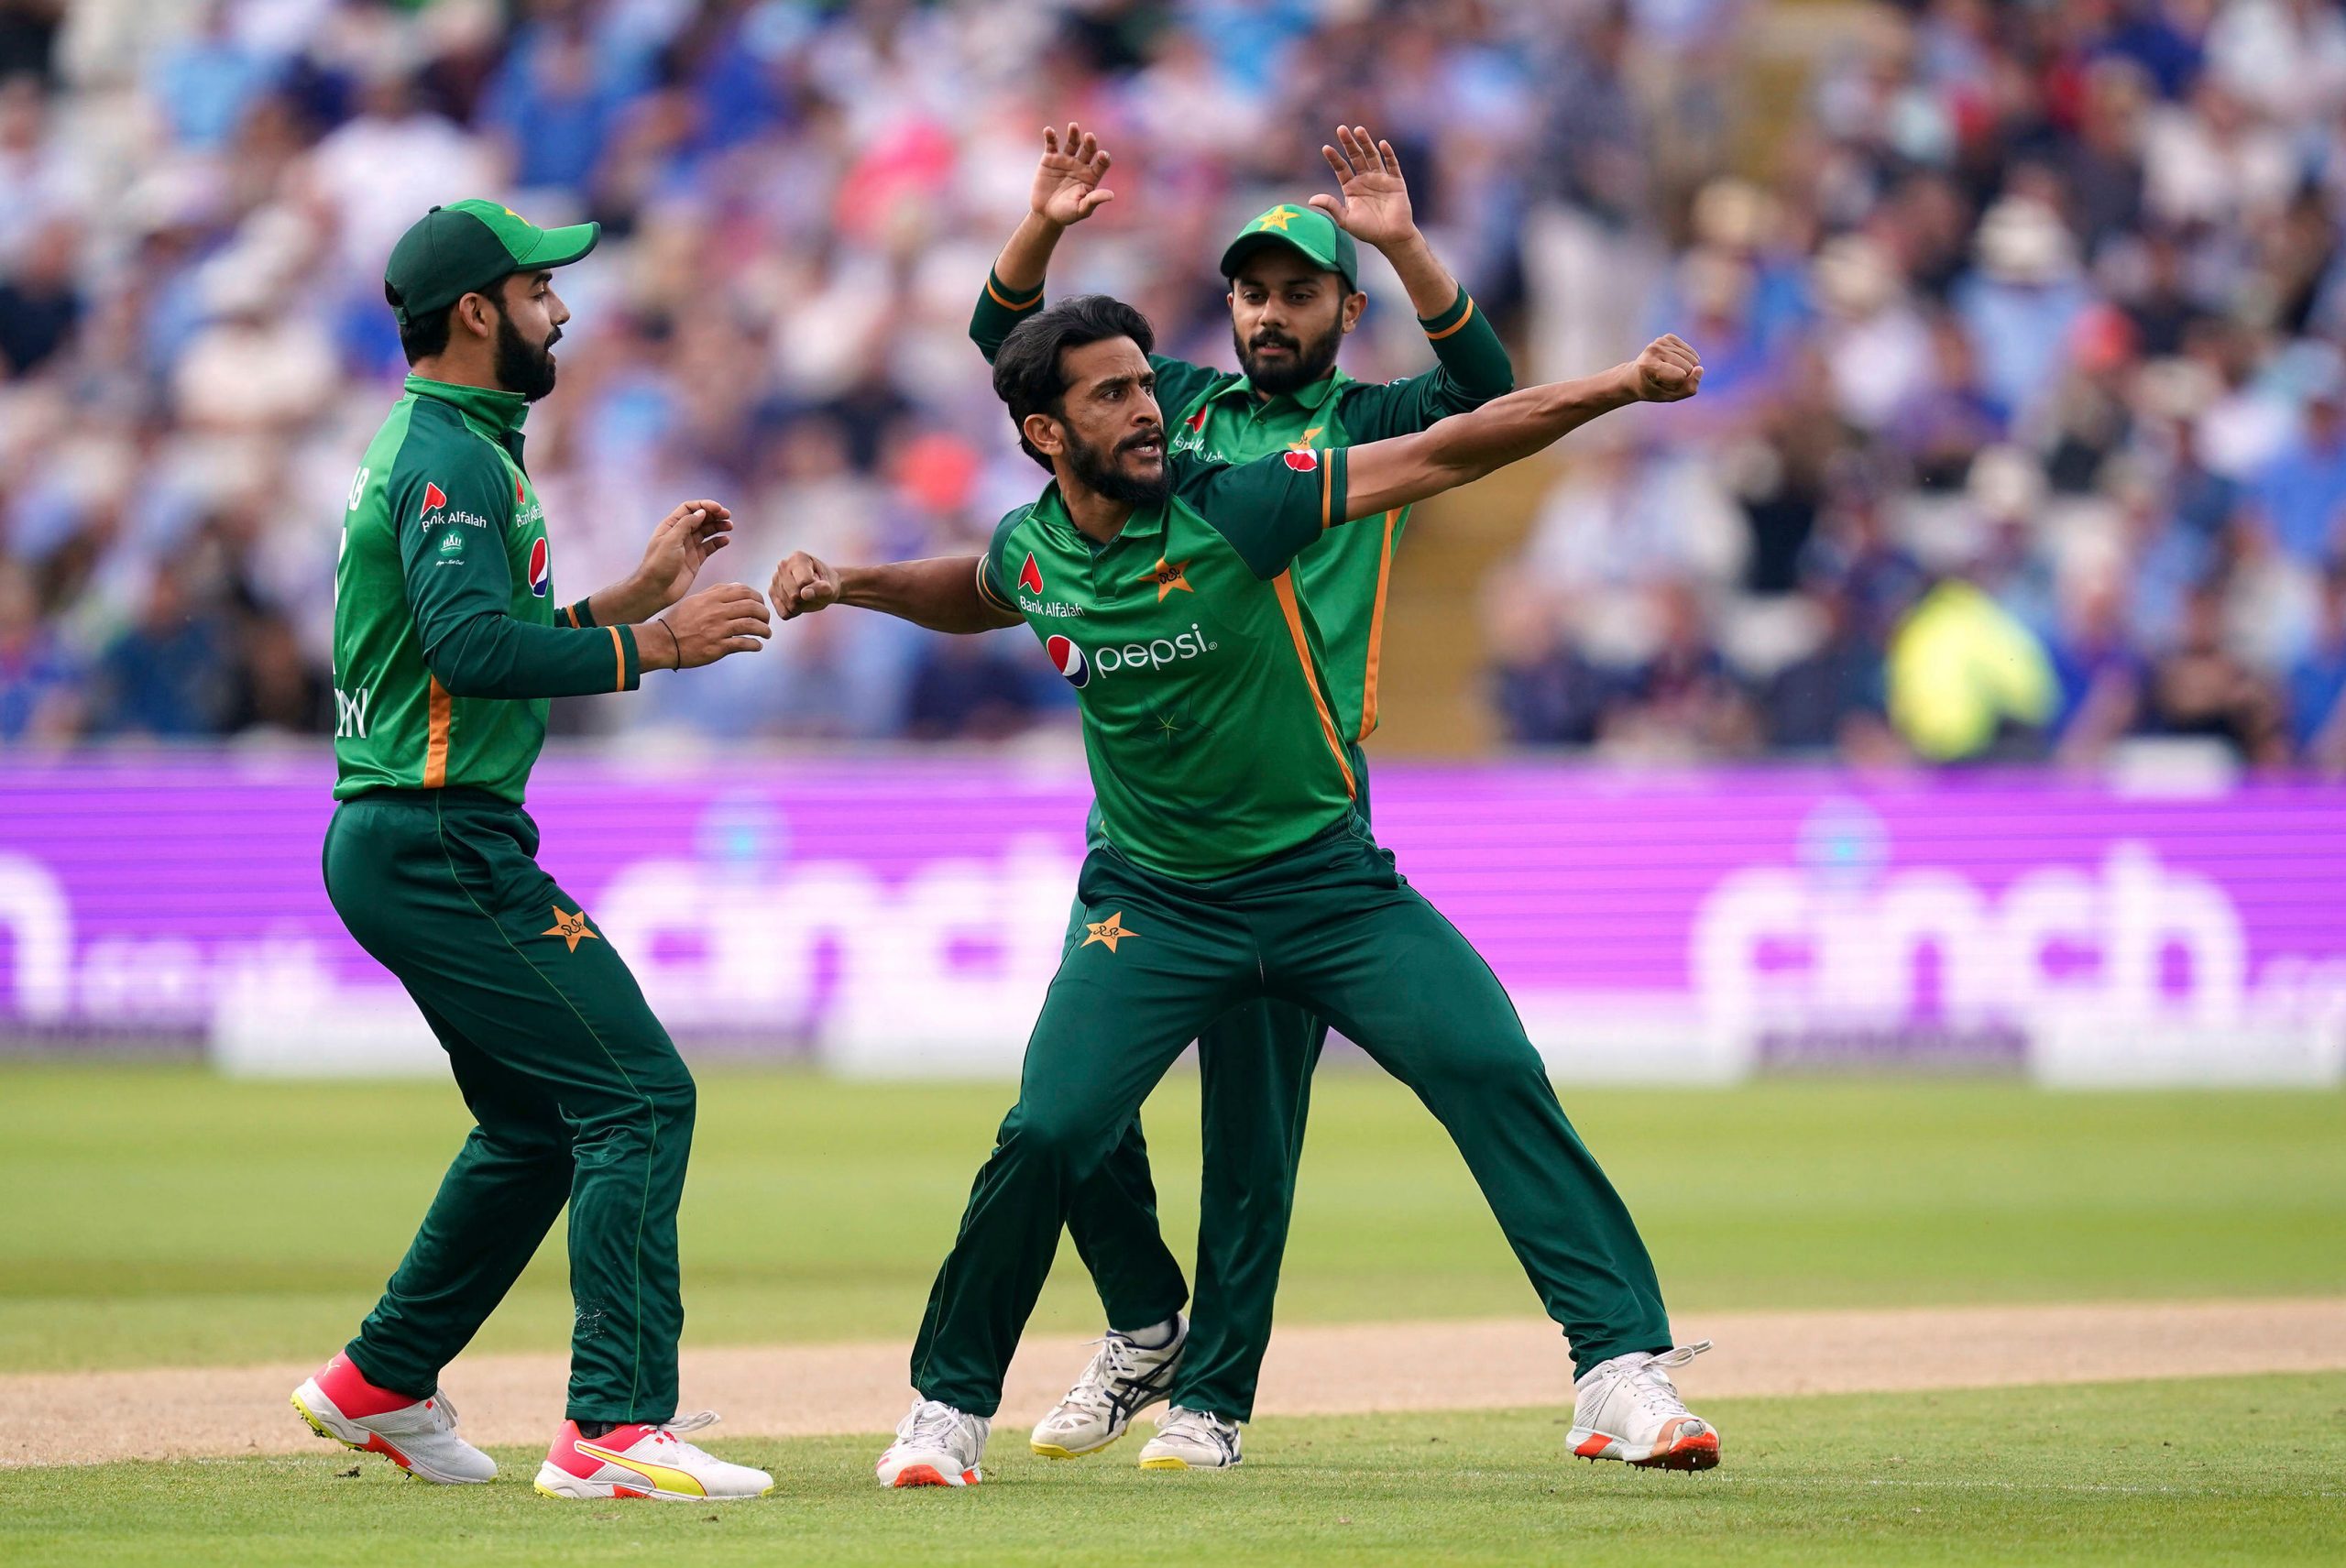 Hasan Ali breaks silence on his dropped catch episode in semis vs Aus